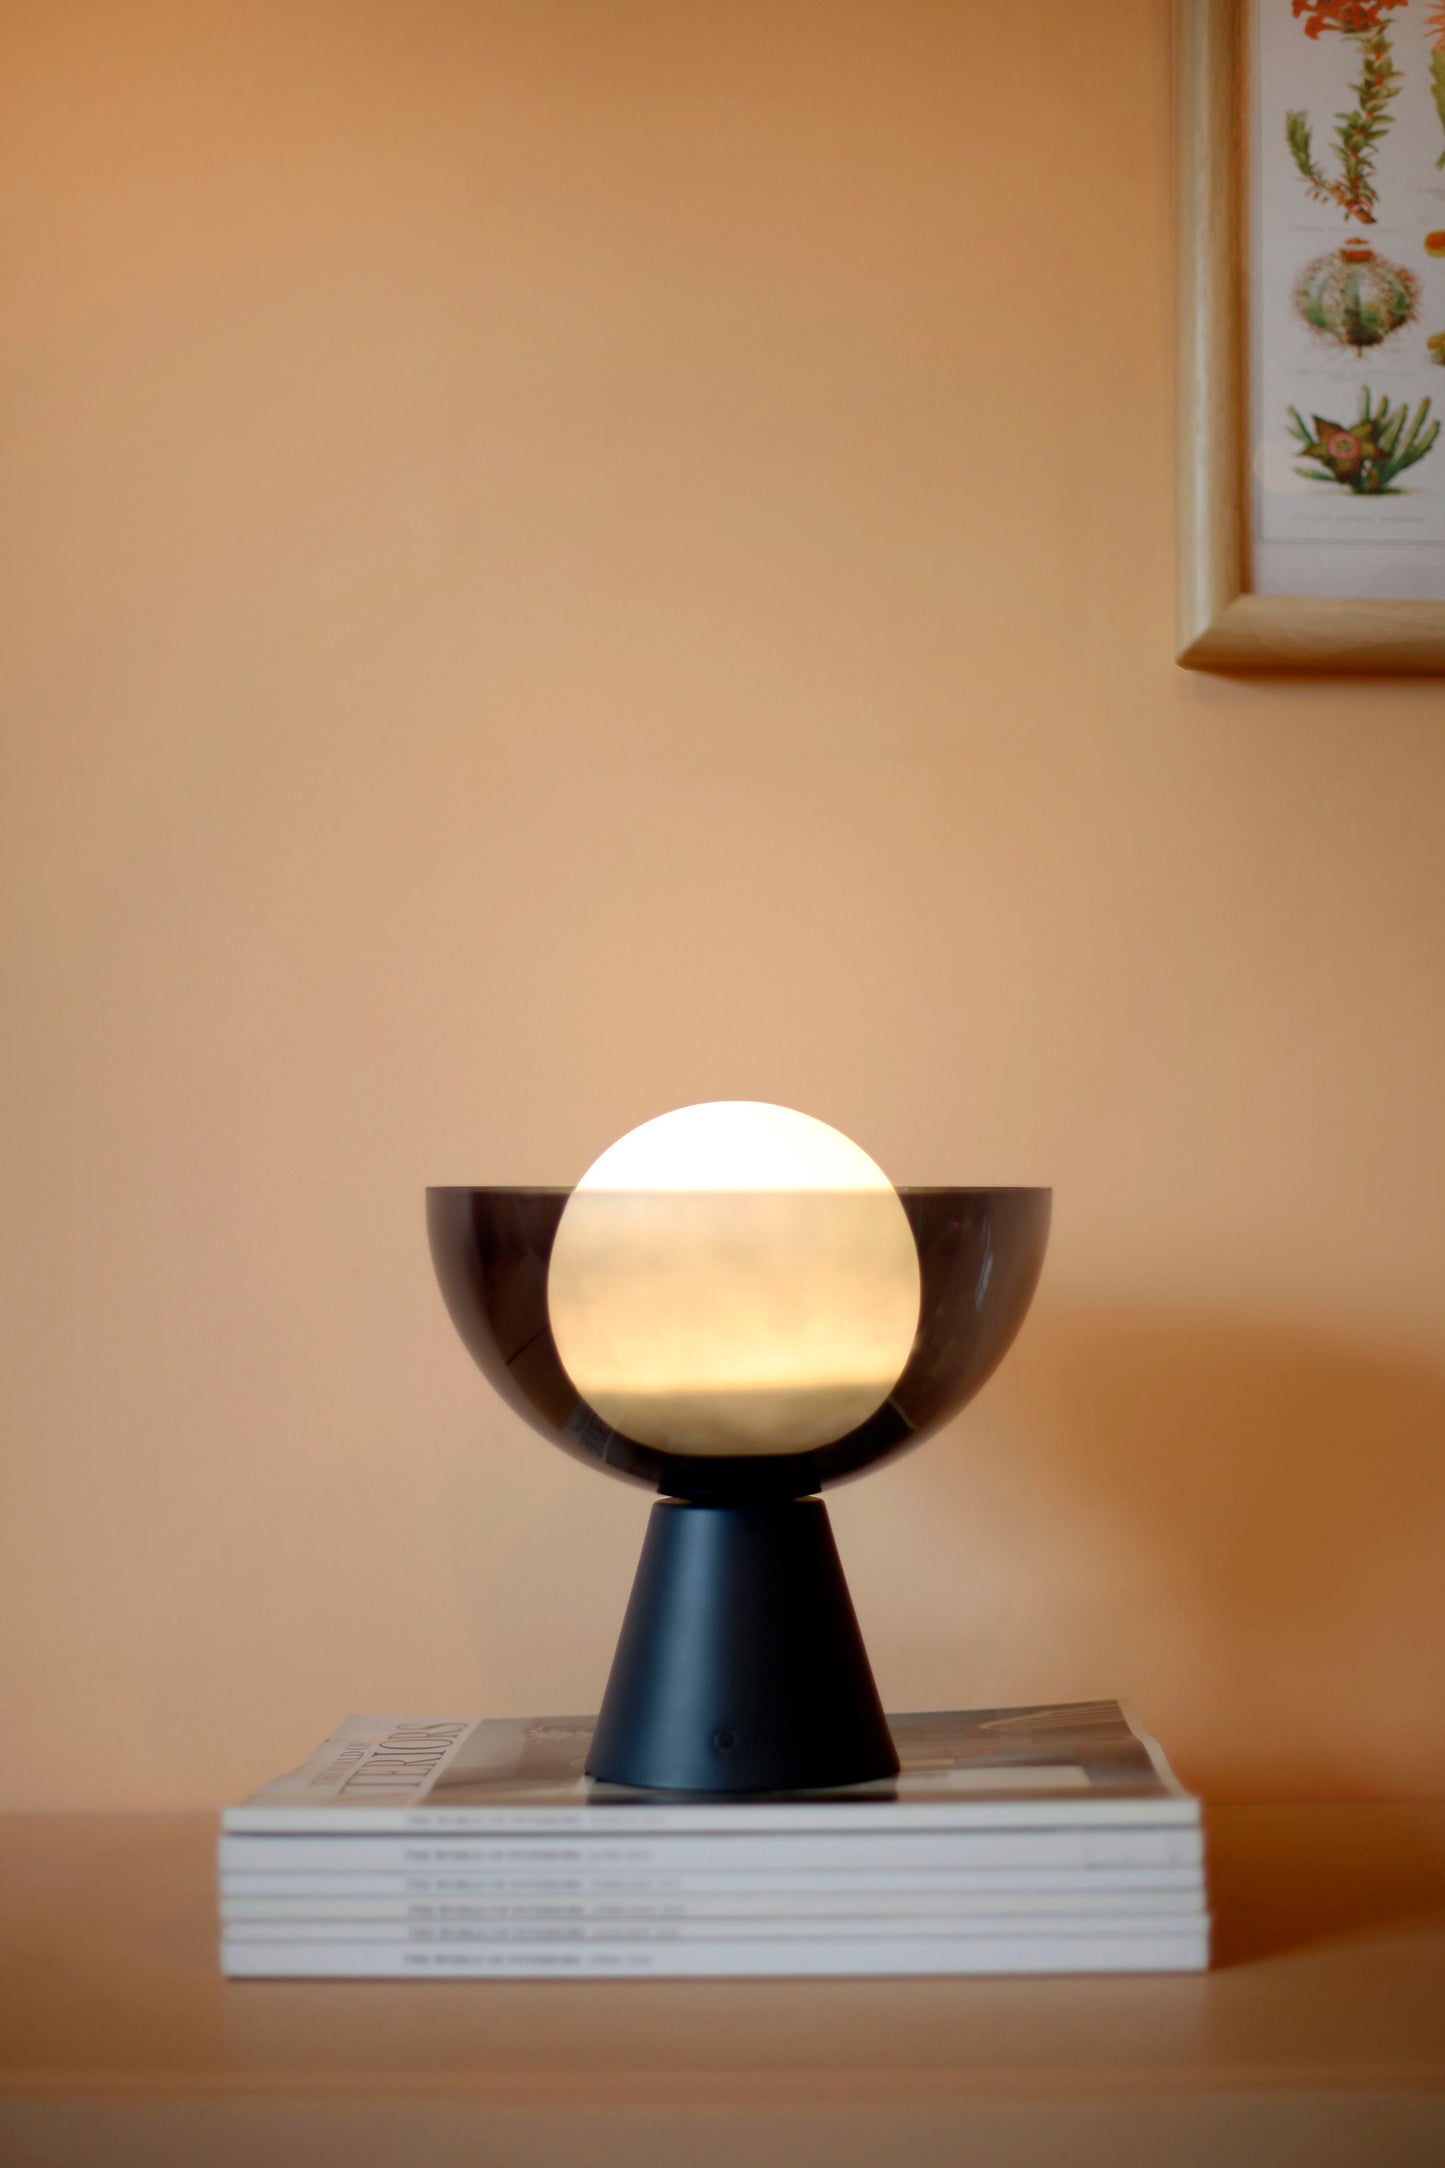 Charcoal grey rechargeable table lamp, on in setting.